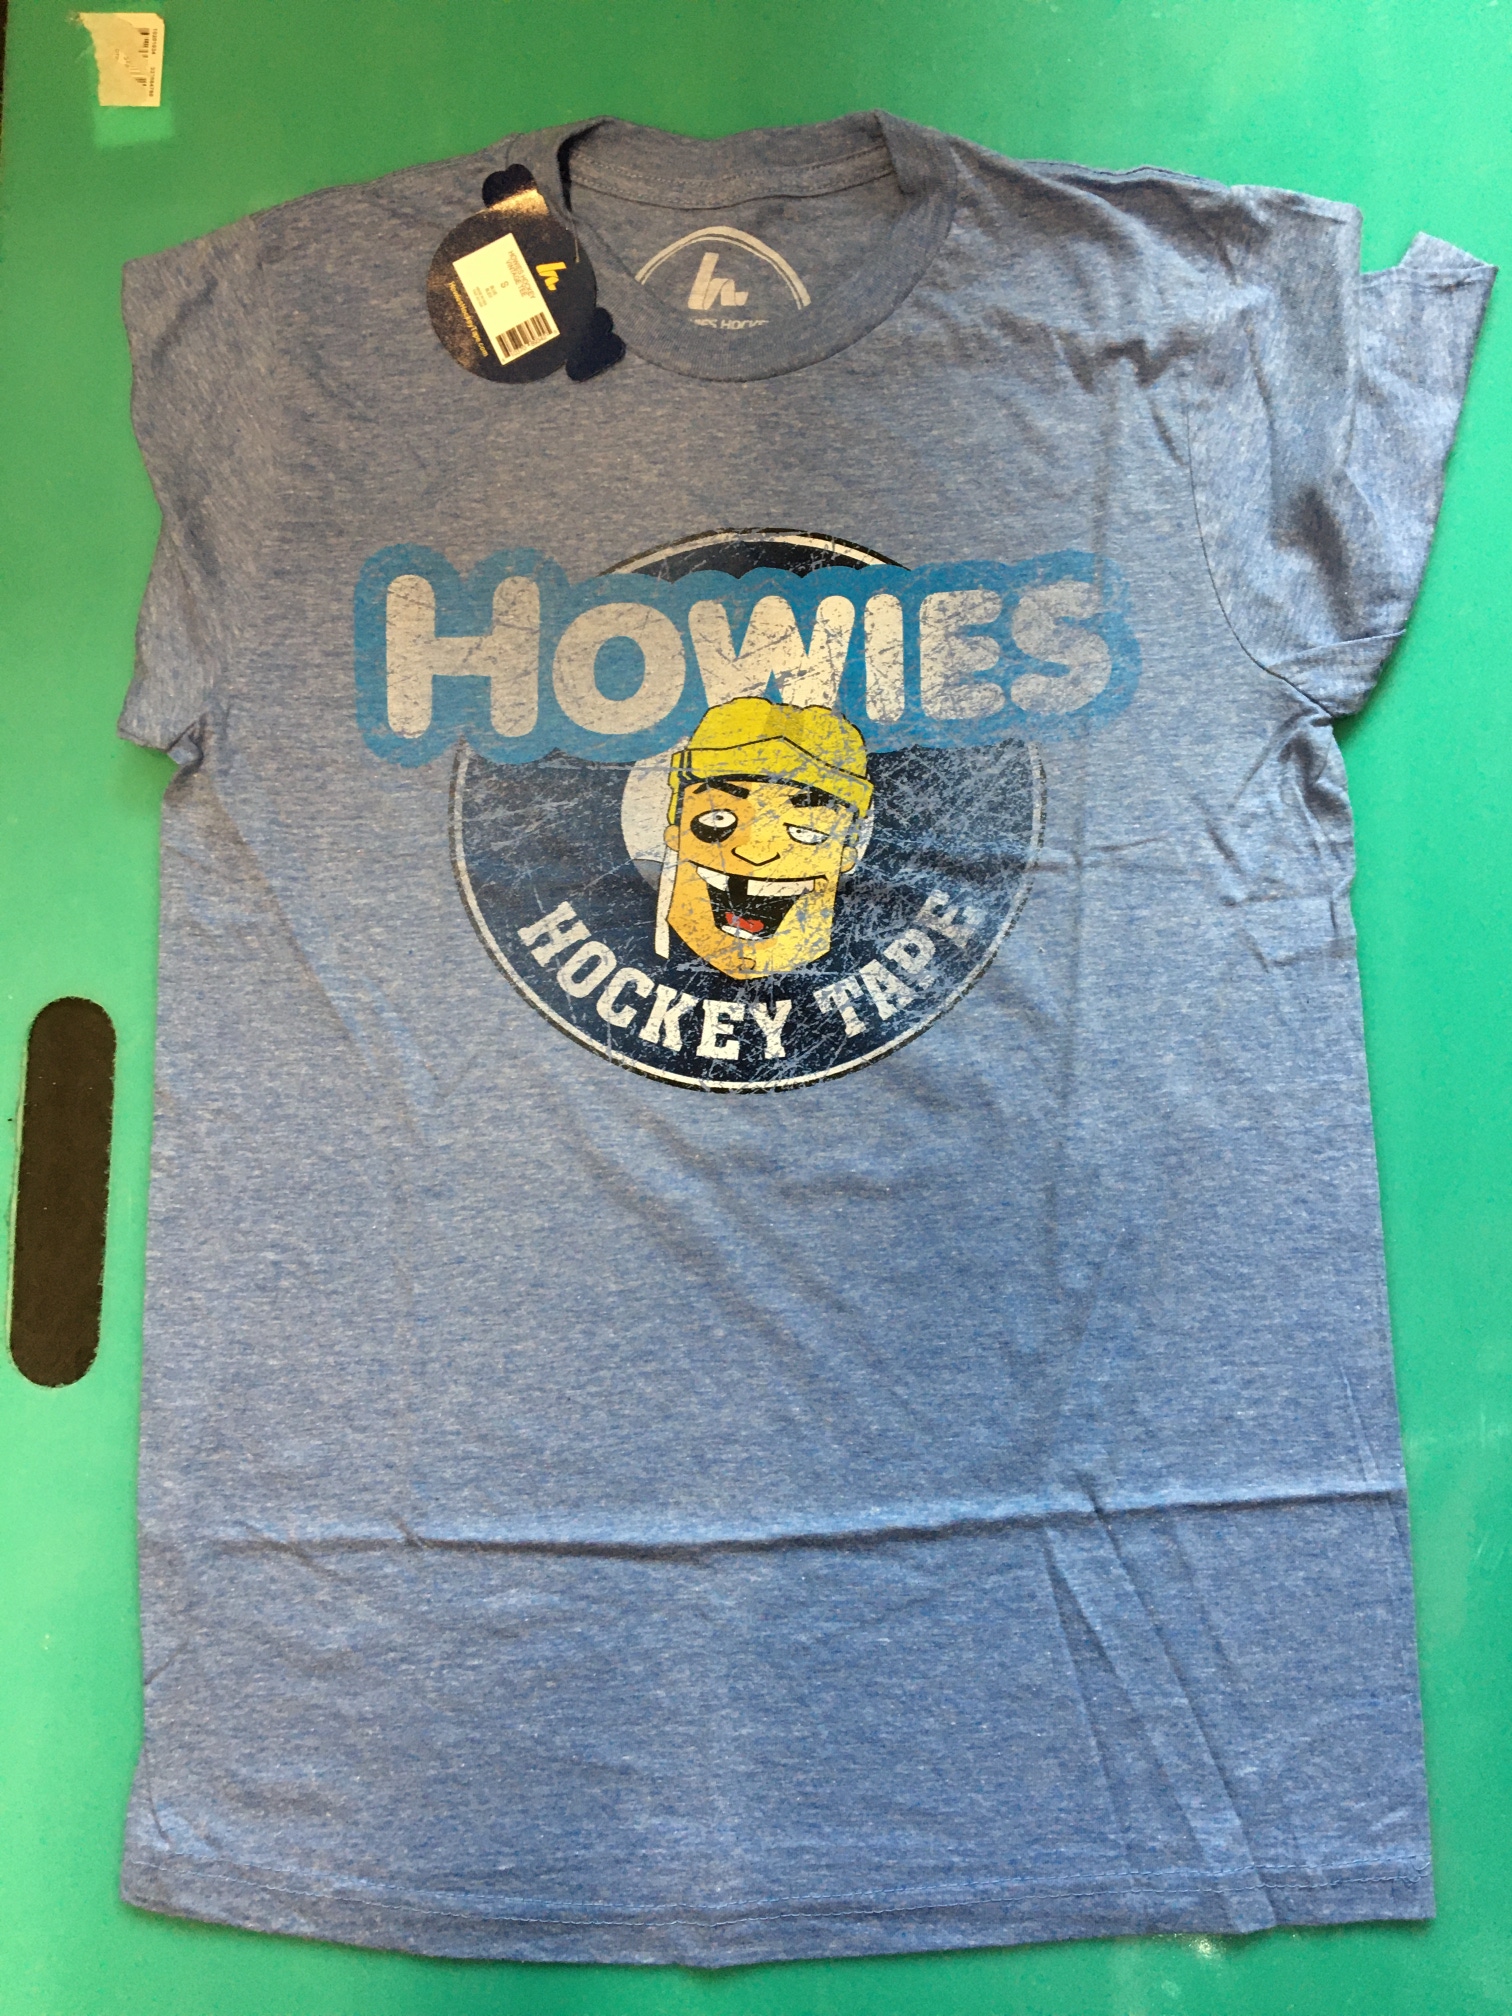 New Blue Howies T-shirt